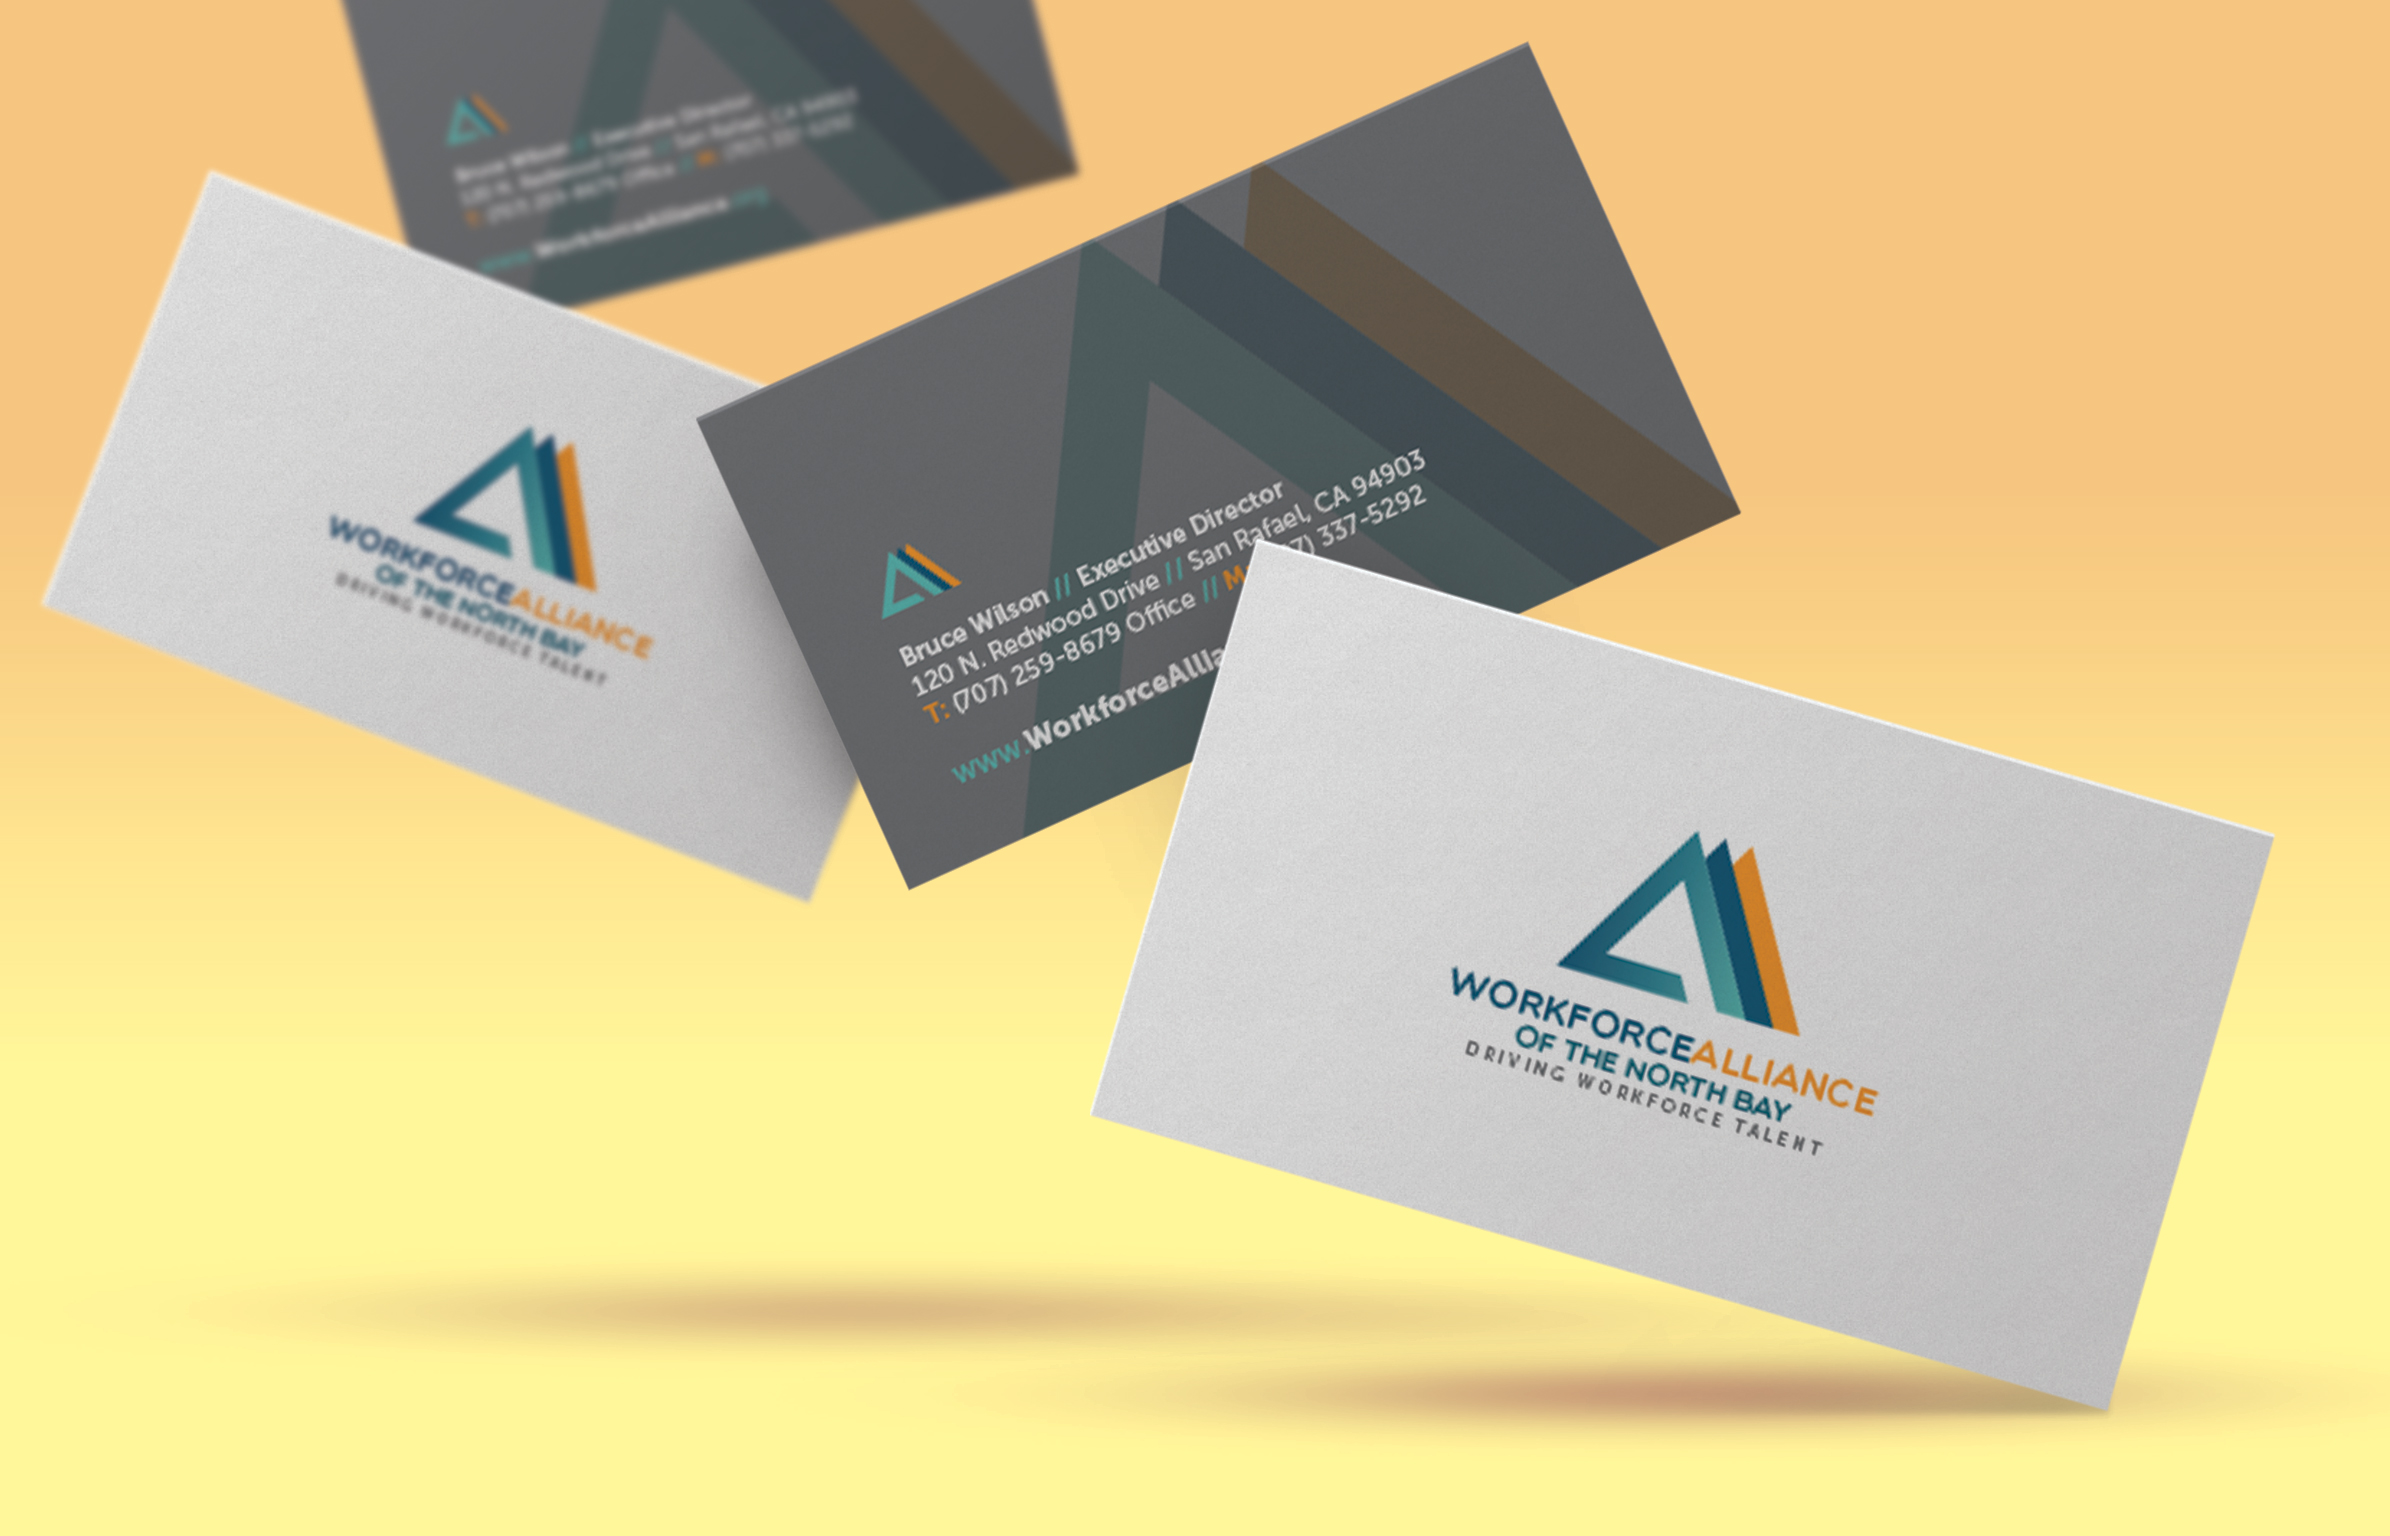 This is FCM portfolio for WANB business card mockup